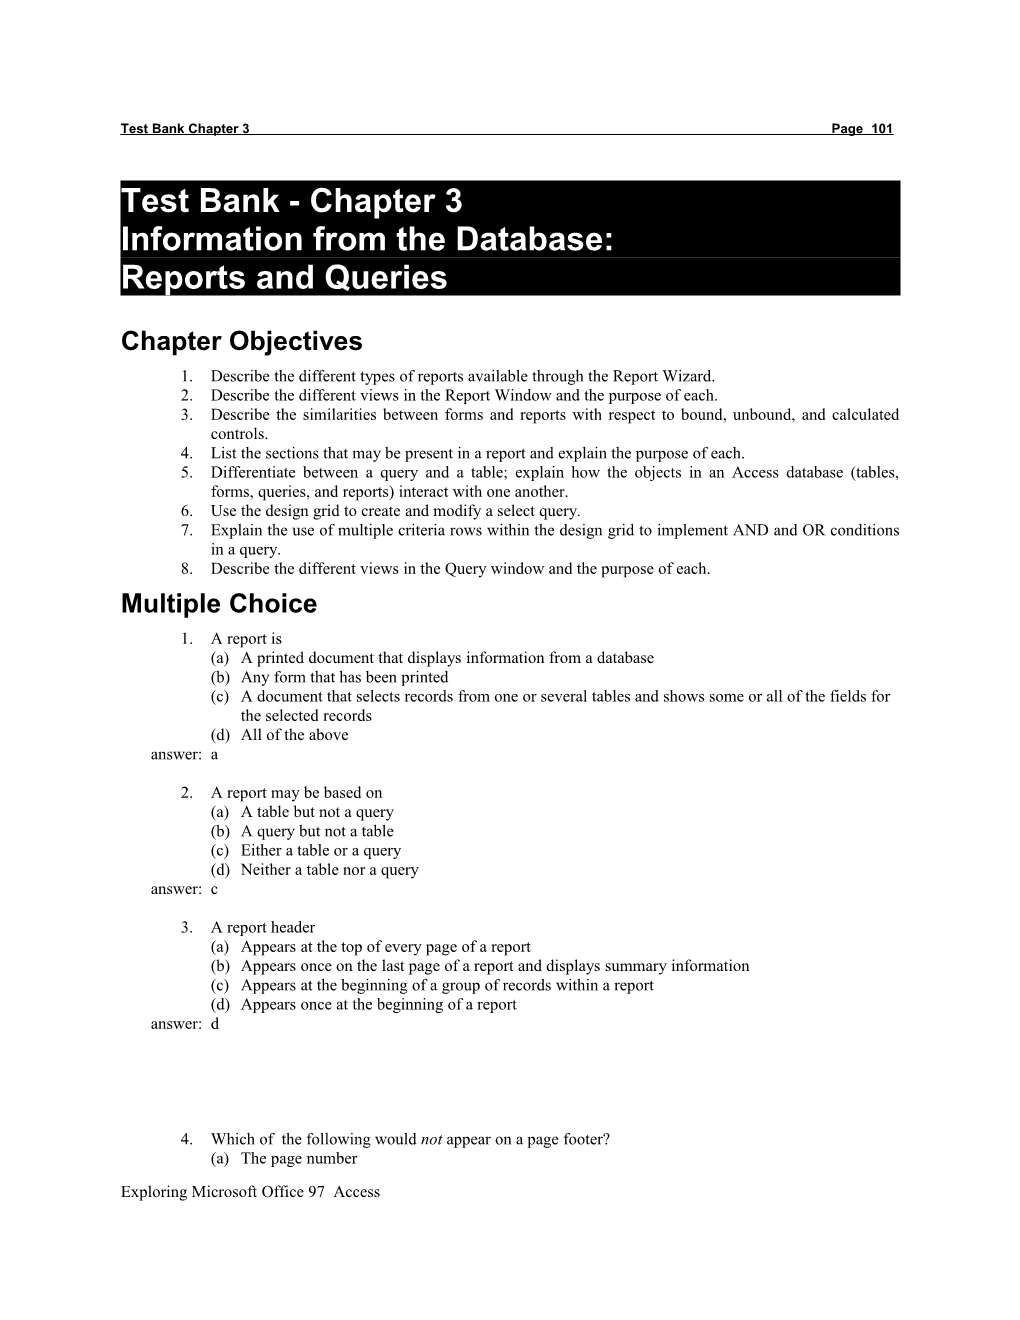 Test Bank - Chapter 3: Information from the Database: Reports and Queries Page 1